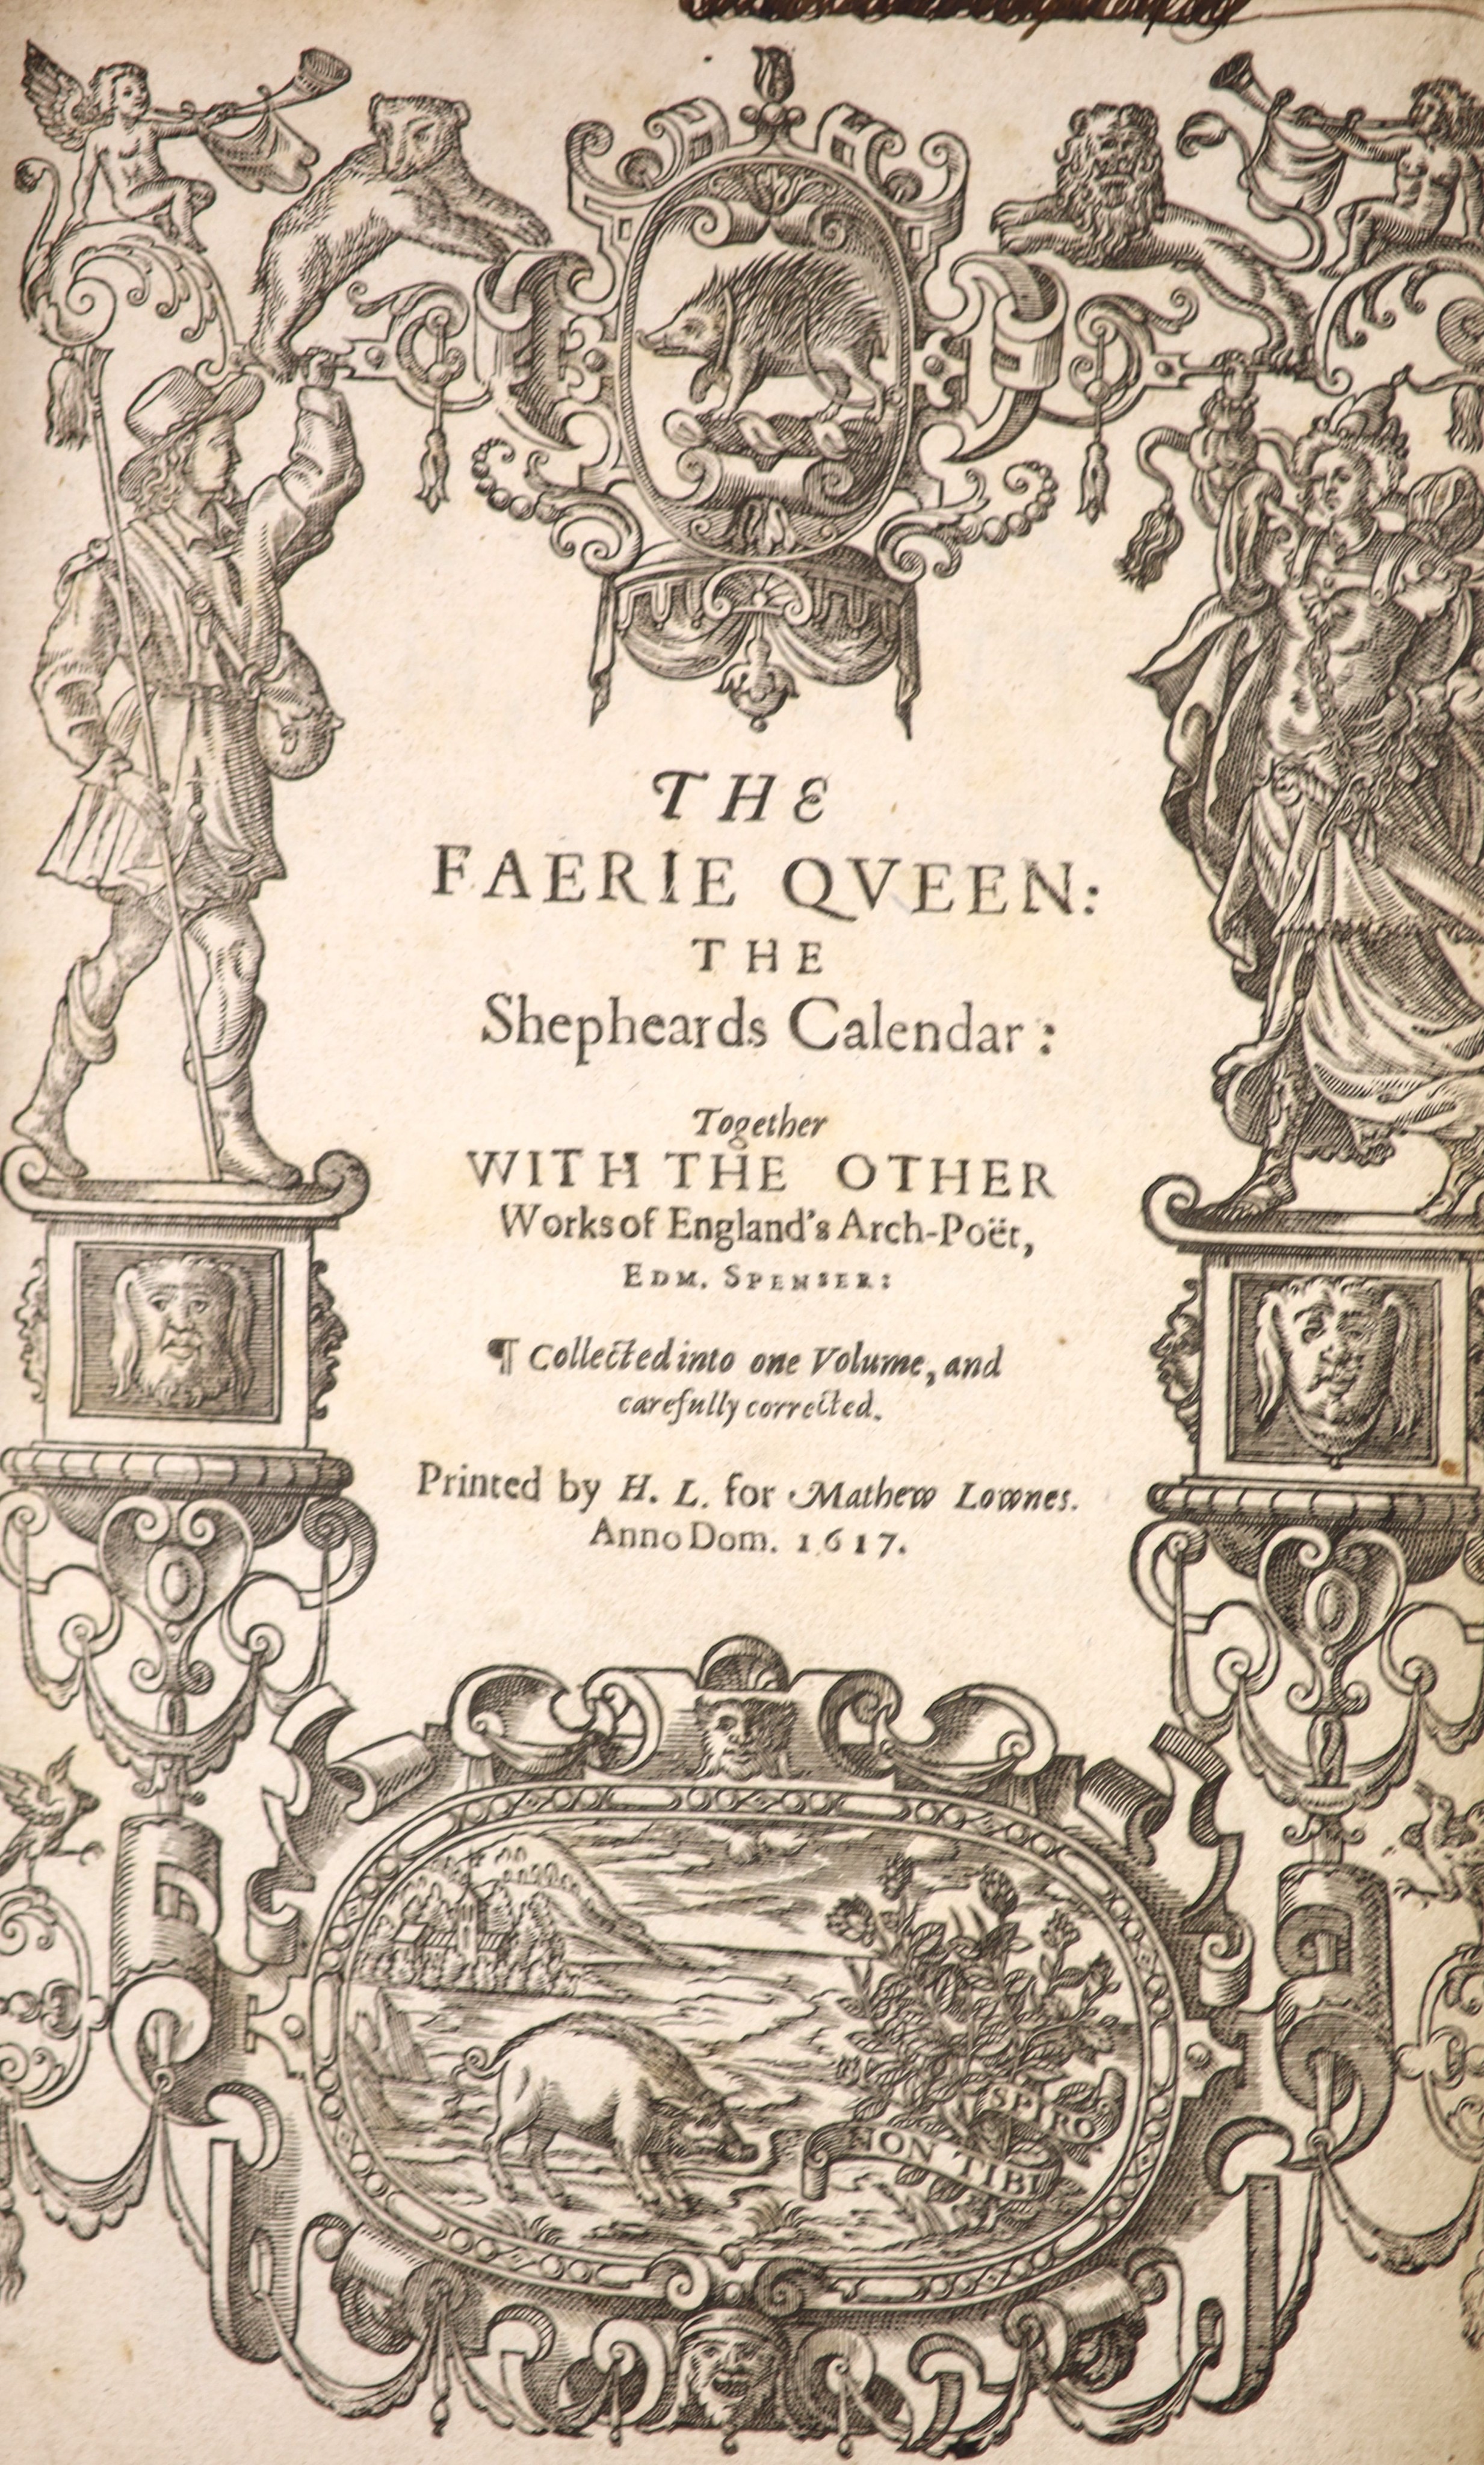 Spenser, Edmund - The Shepheards Calendar: together with the other works of England's Arch-Poet ... collected into one volume, and carefully corrected. pictorial engraved title